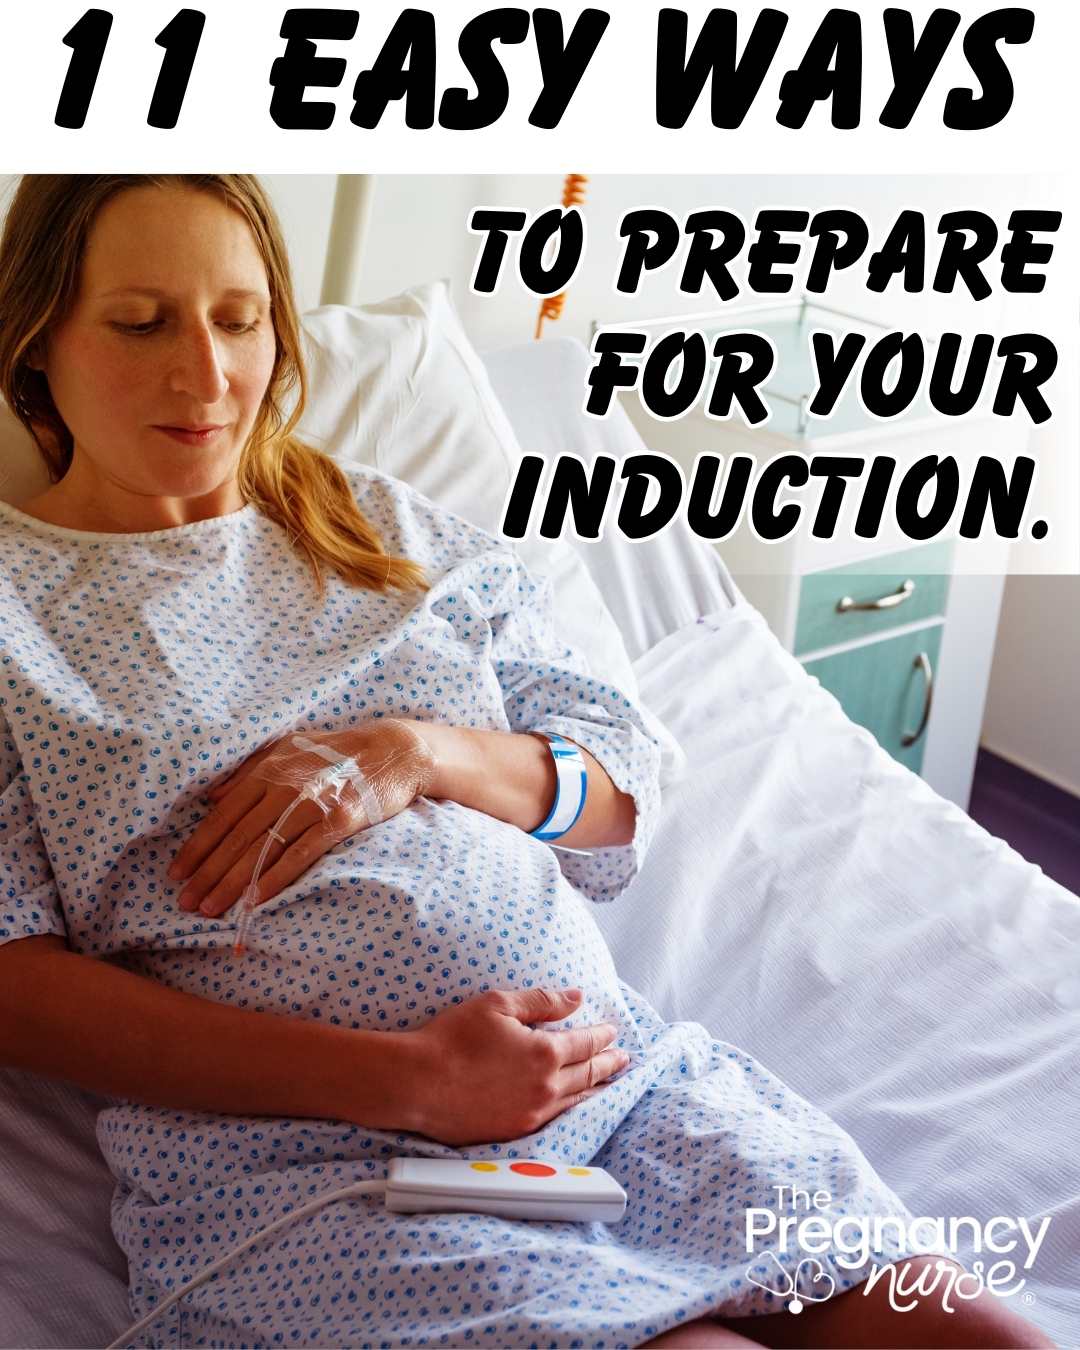 Do you want to ensure you and your baby are safely and effectively prepared for labor induction? If so, consider following these tips and steps to ensure you and your baby are as ready as possible to undergo the labor induction process. With these preparations, you and your baby can be confident and prepared to face the challenges of labor induction, so read on to learn how to best get ready for your labor induction.